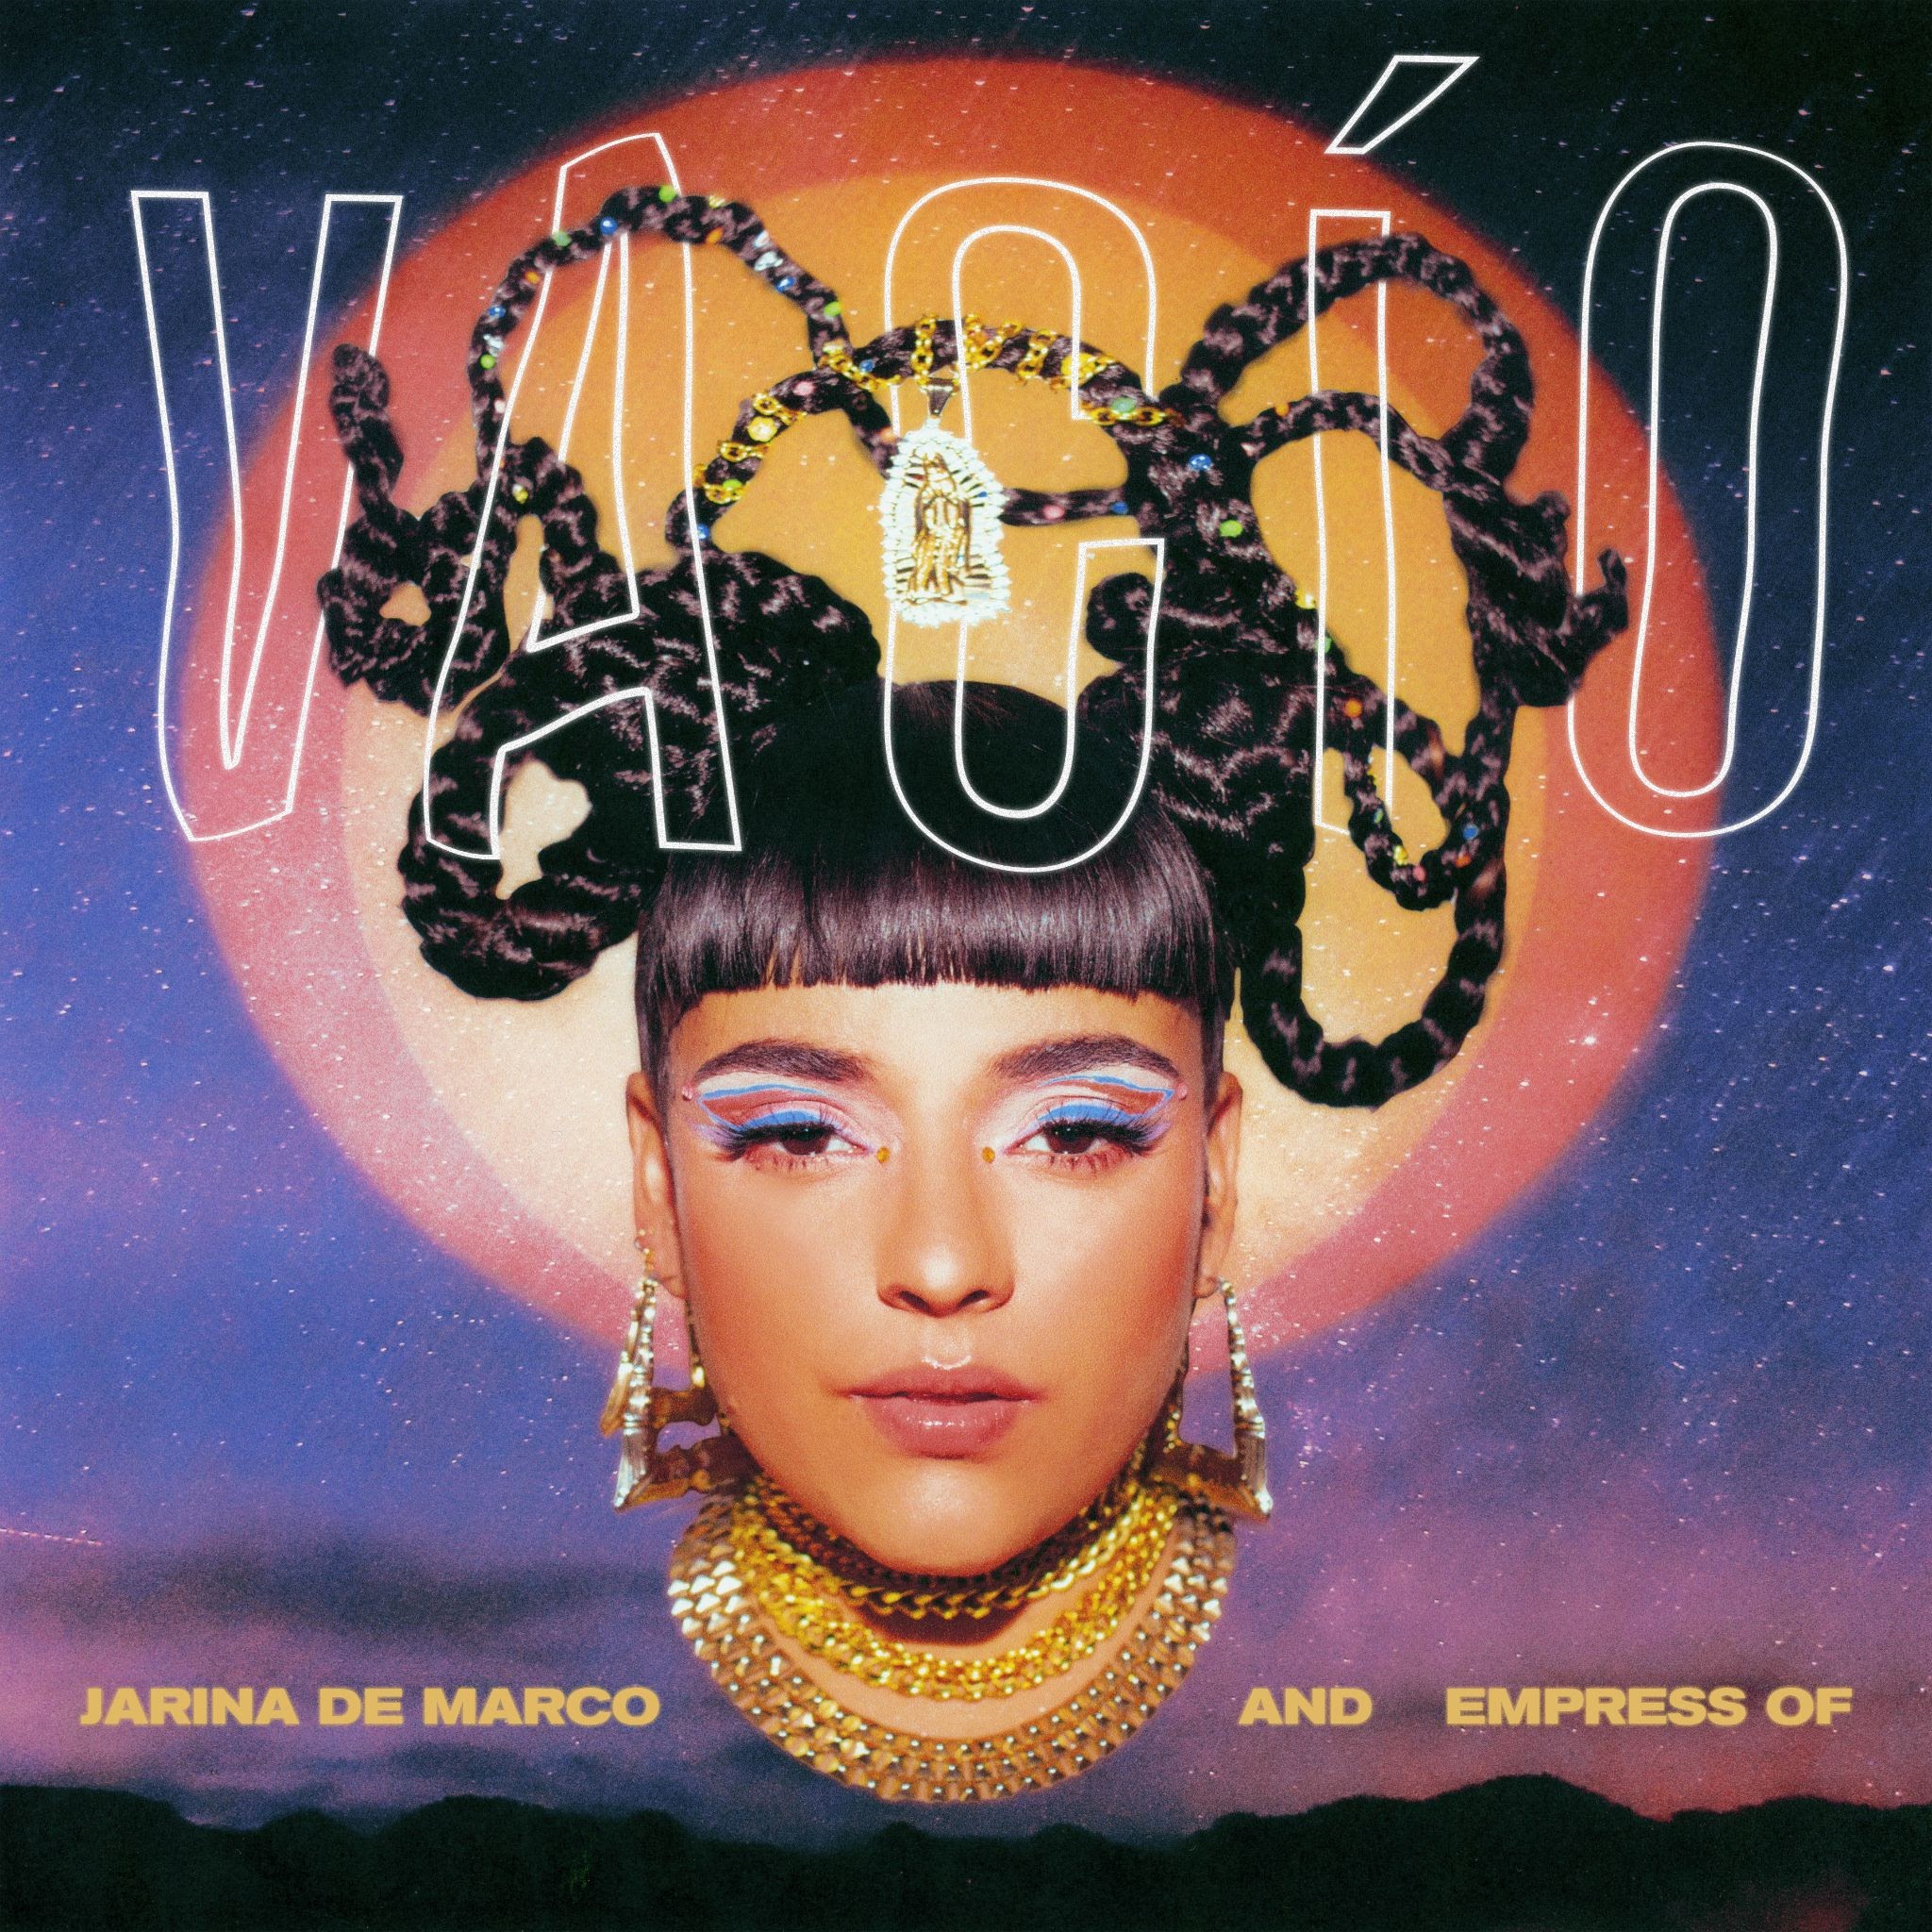 Jarina De Marco and Empress Of Team Up to Release the Hypnotic New Single “Vacío”